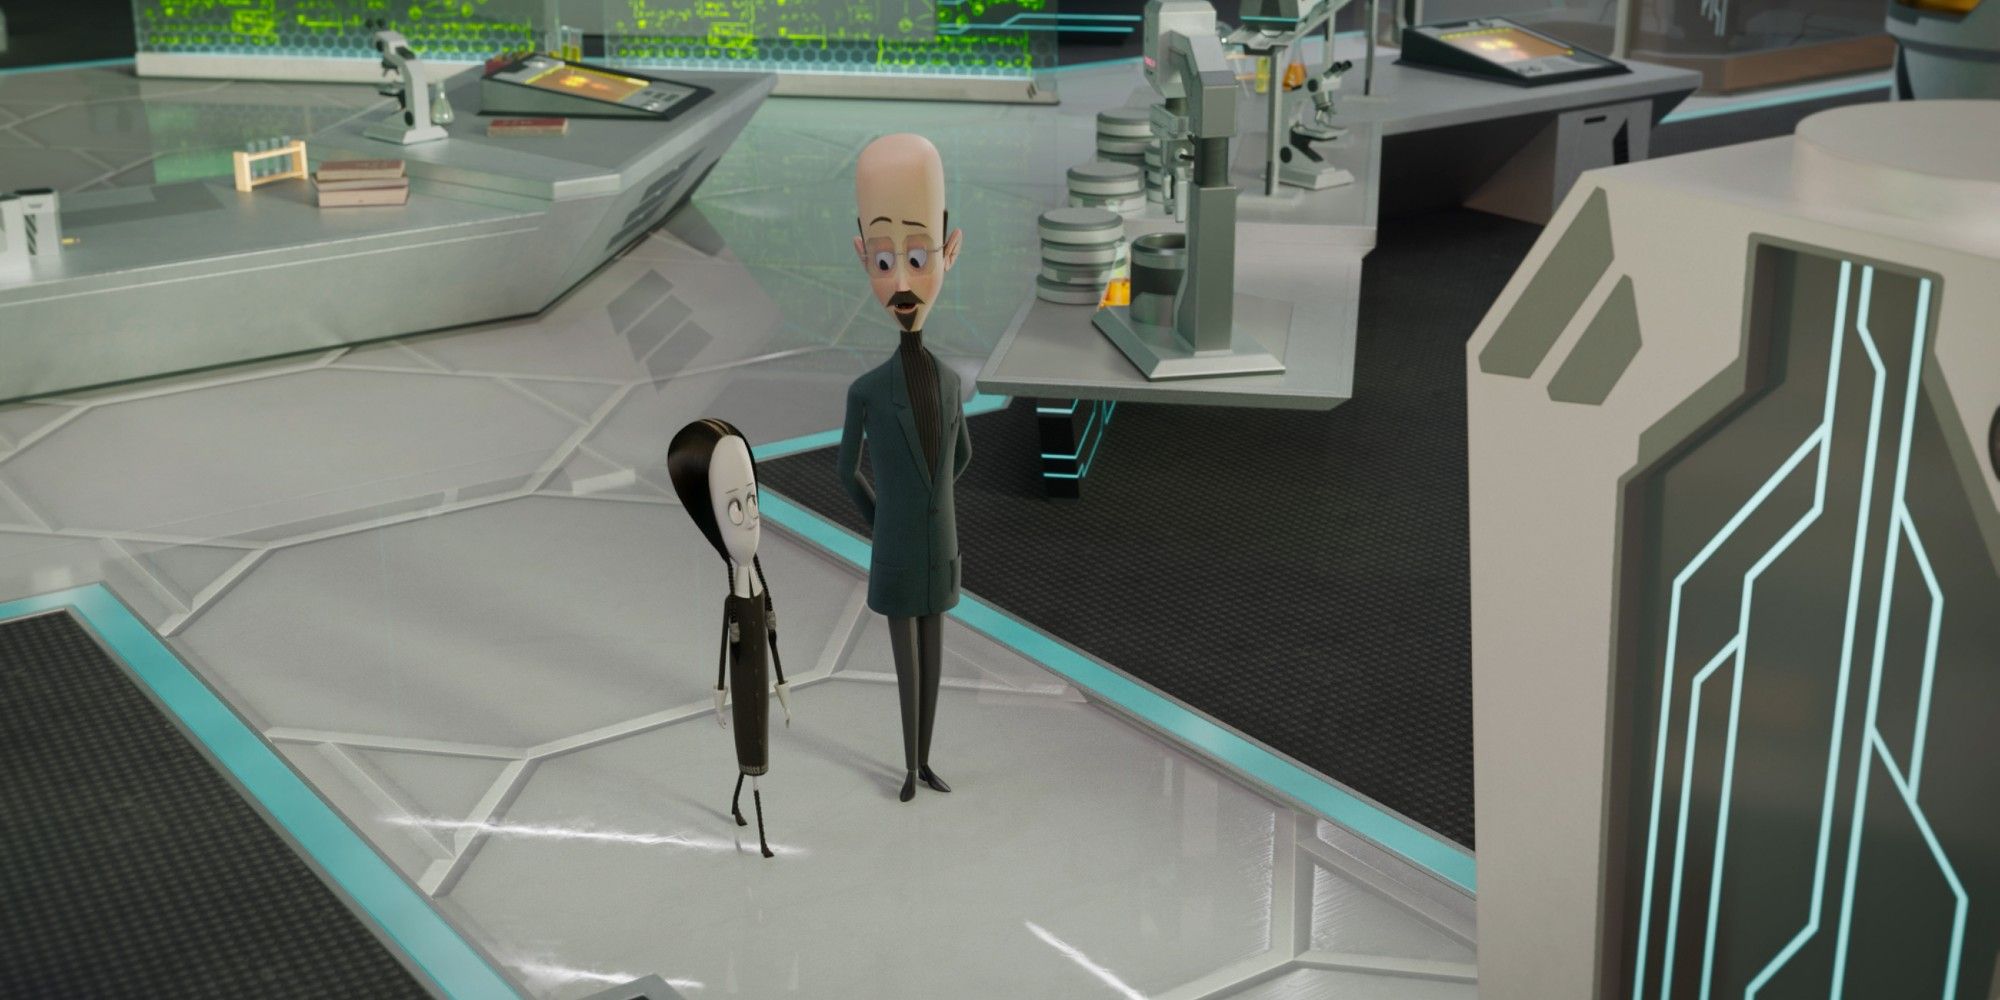 Cyrus Strange shows Wednesday his lab in The Addams Family 2